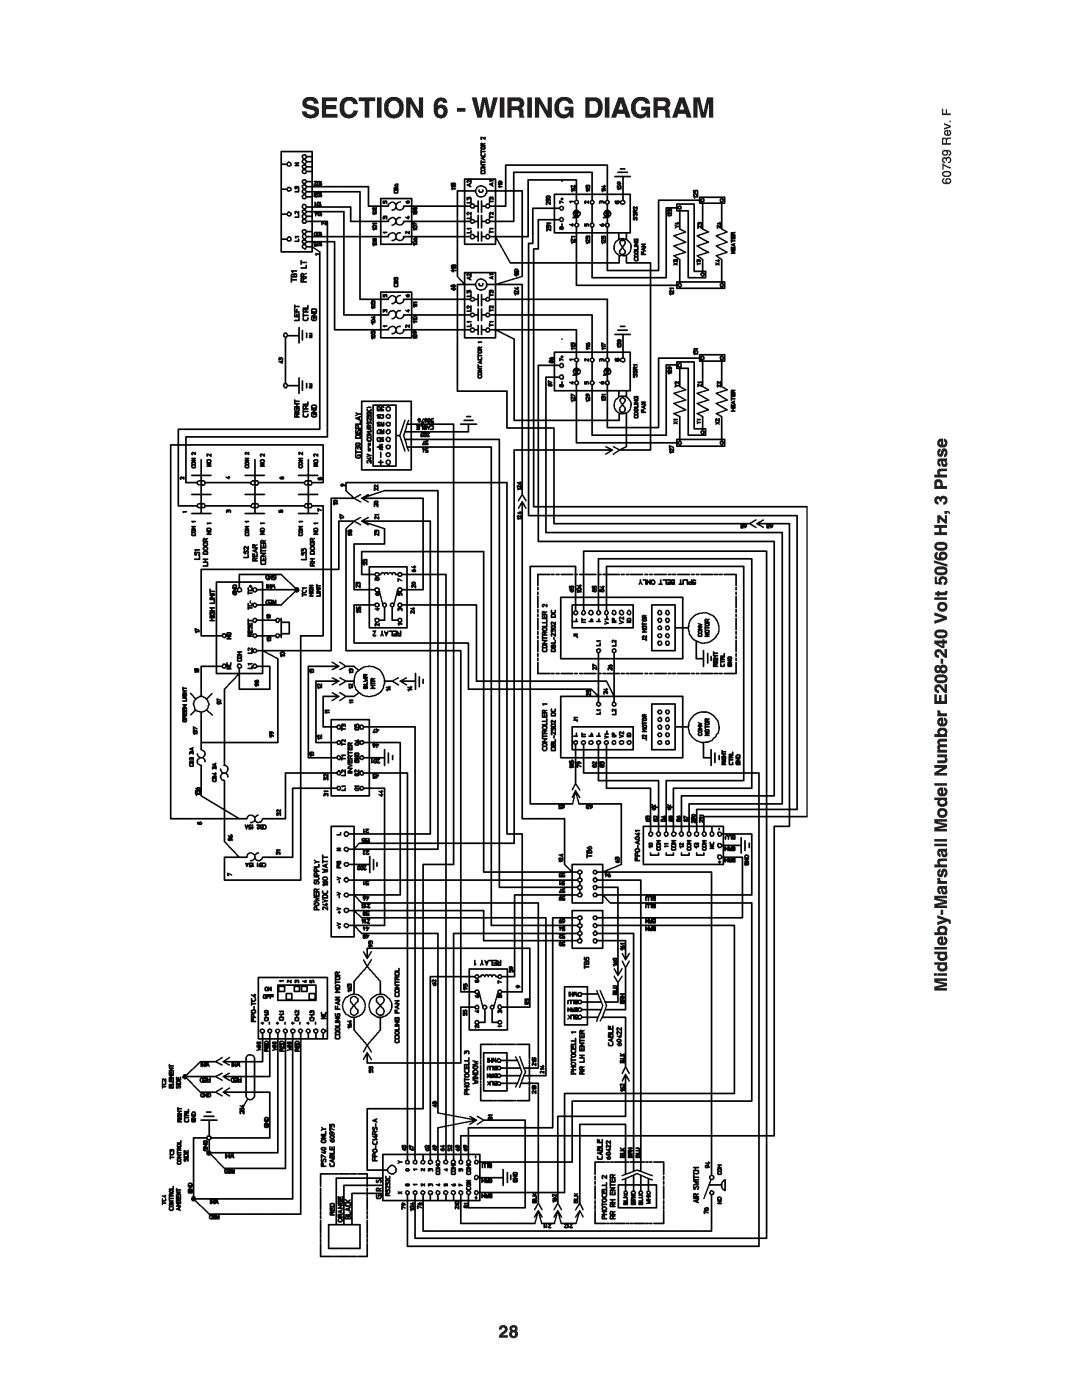 Middleby Marshall PS740E installation manual Wiring Diagram, Middleby-Marshall Model Number E208-240 Volt 50/60 Hz, 3 Phase 